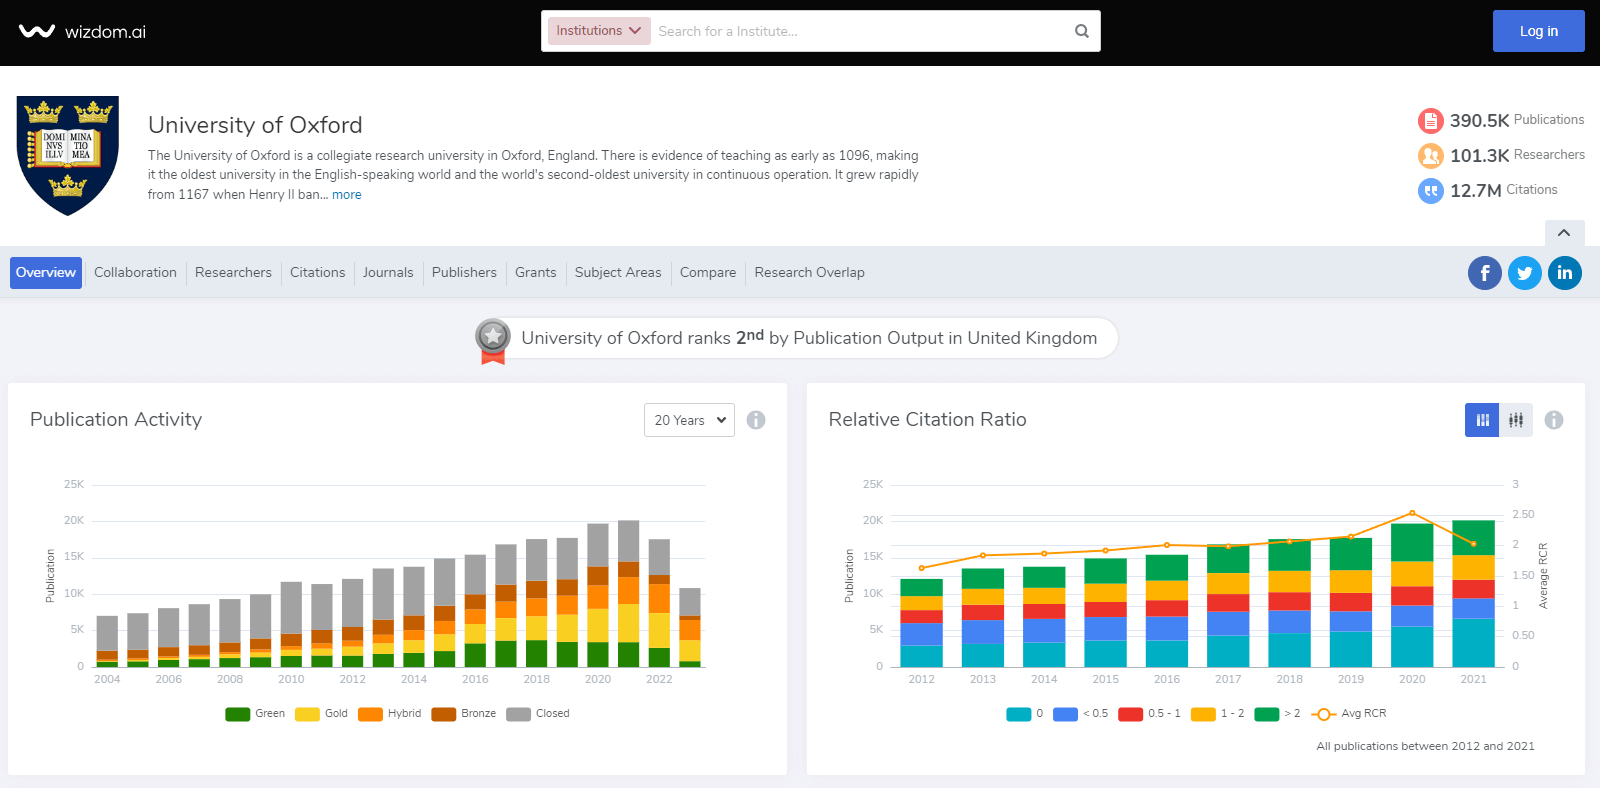 Wizdom’s data rich interface for the University of Oxford